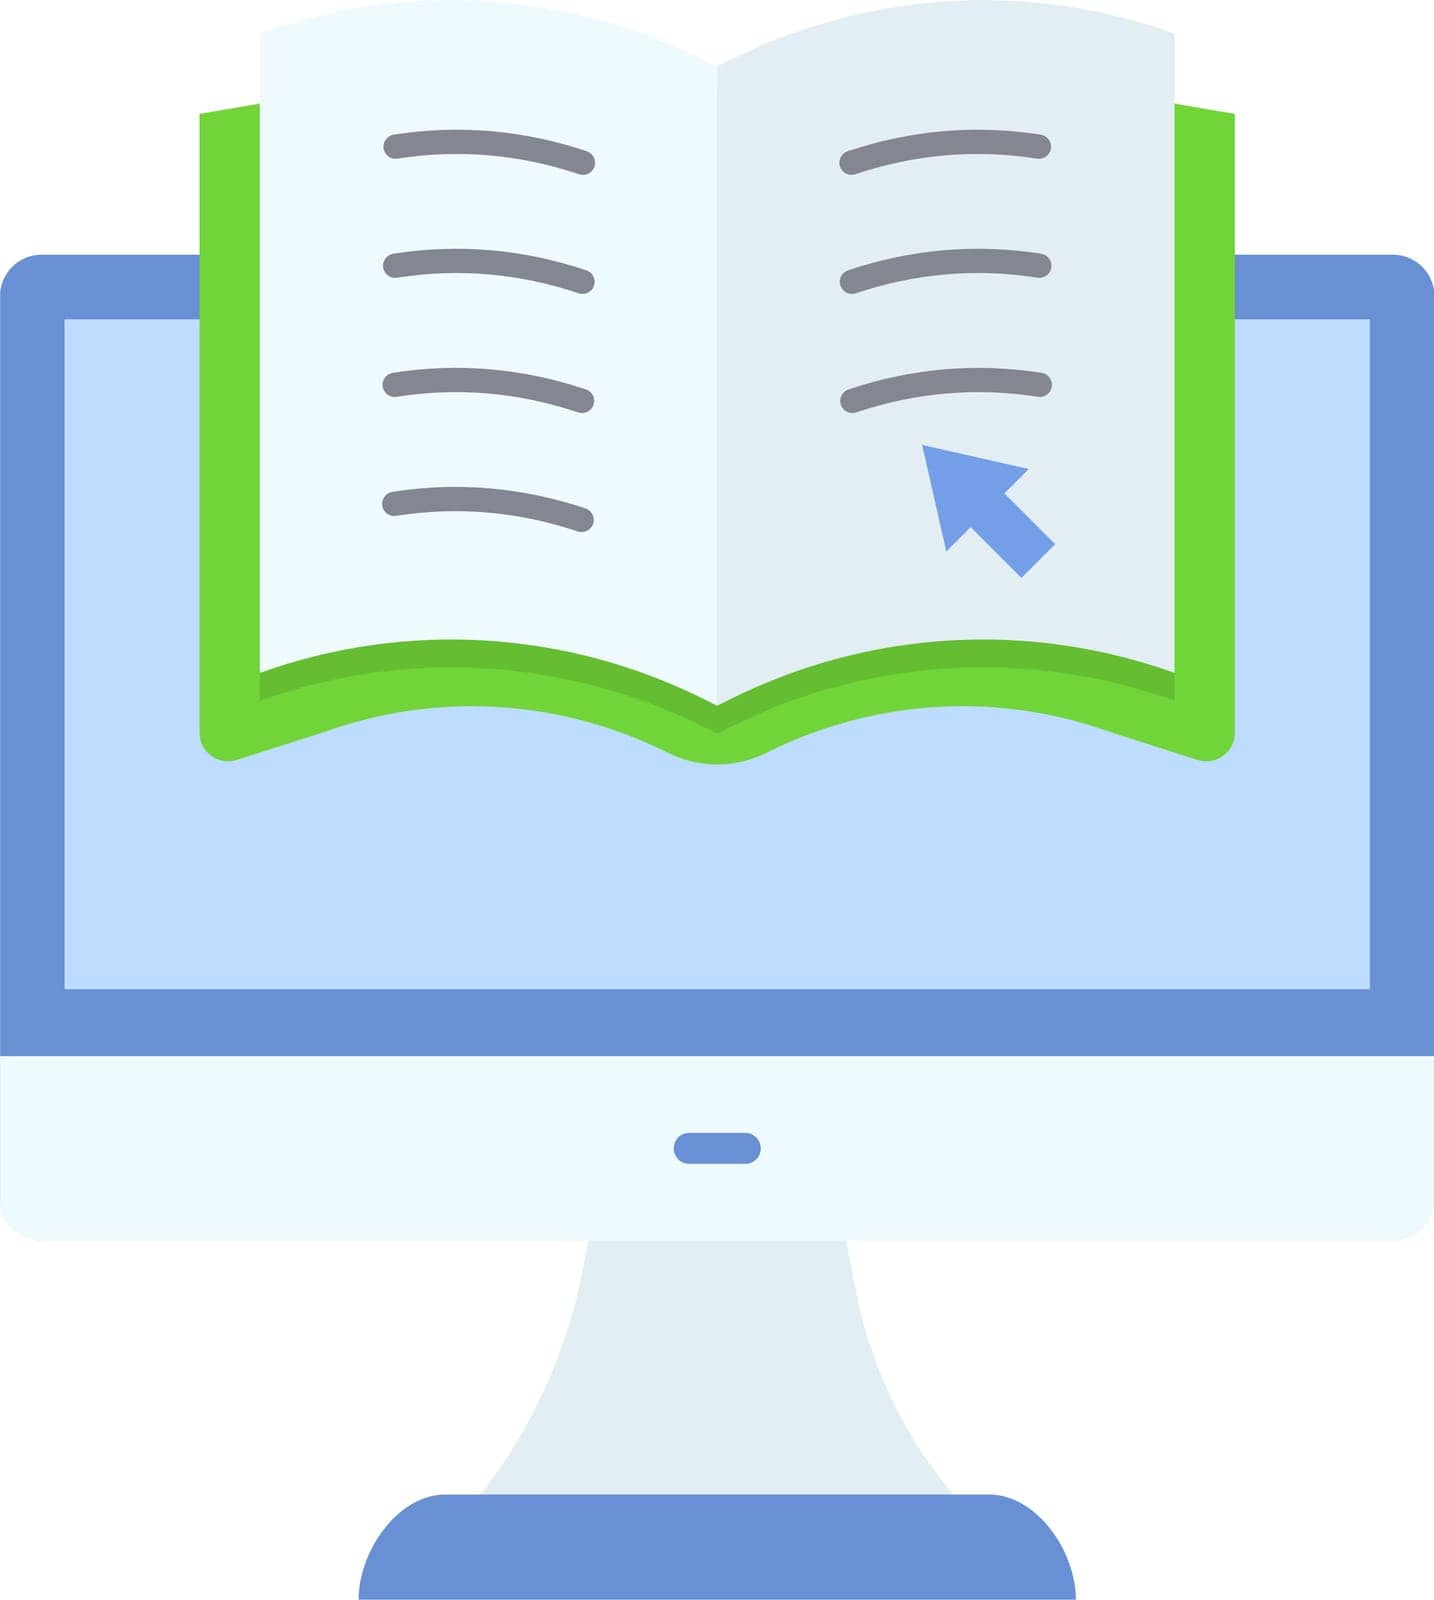 Online Learning Icon Image. by ICONBUNNY